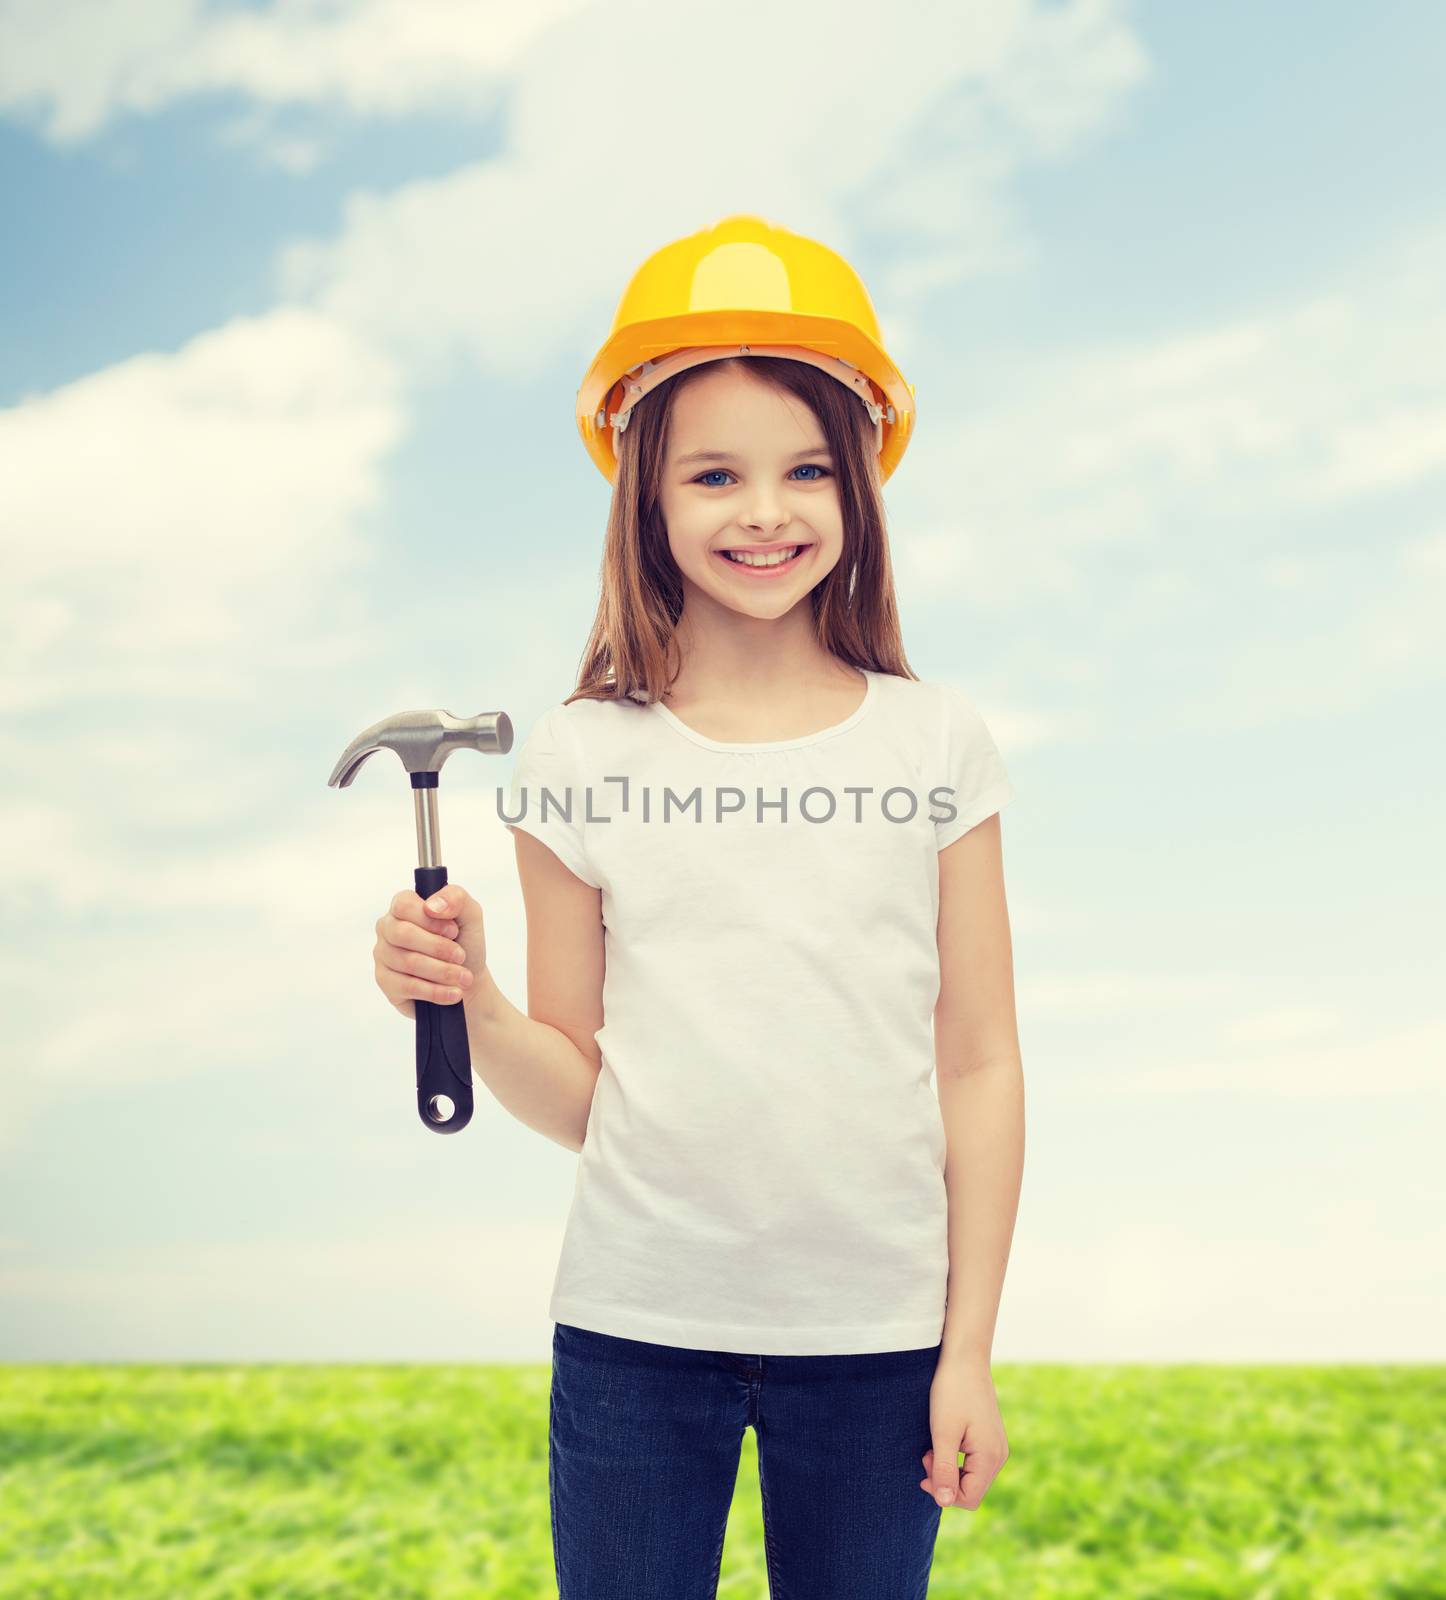 construction and people concept - smiling little girl in protective helmet with hammer